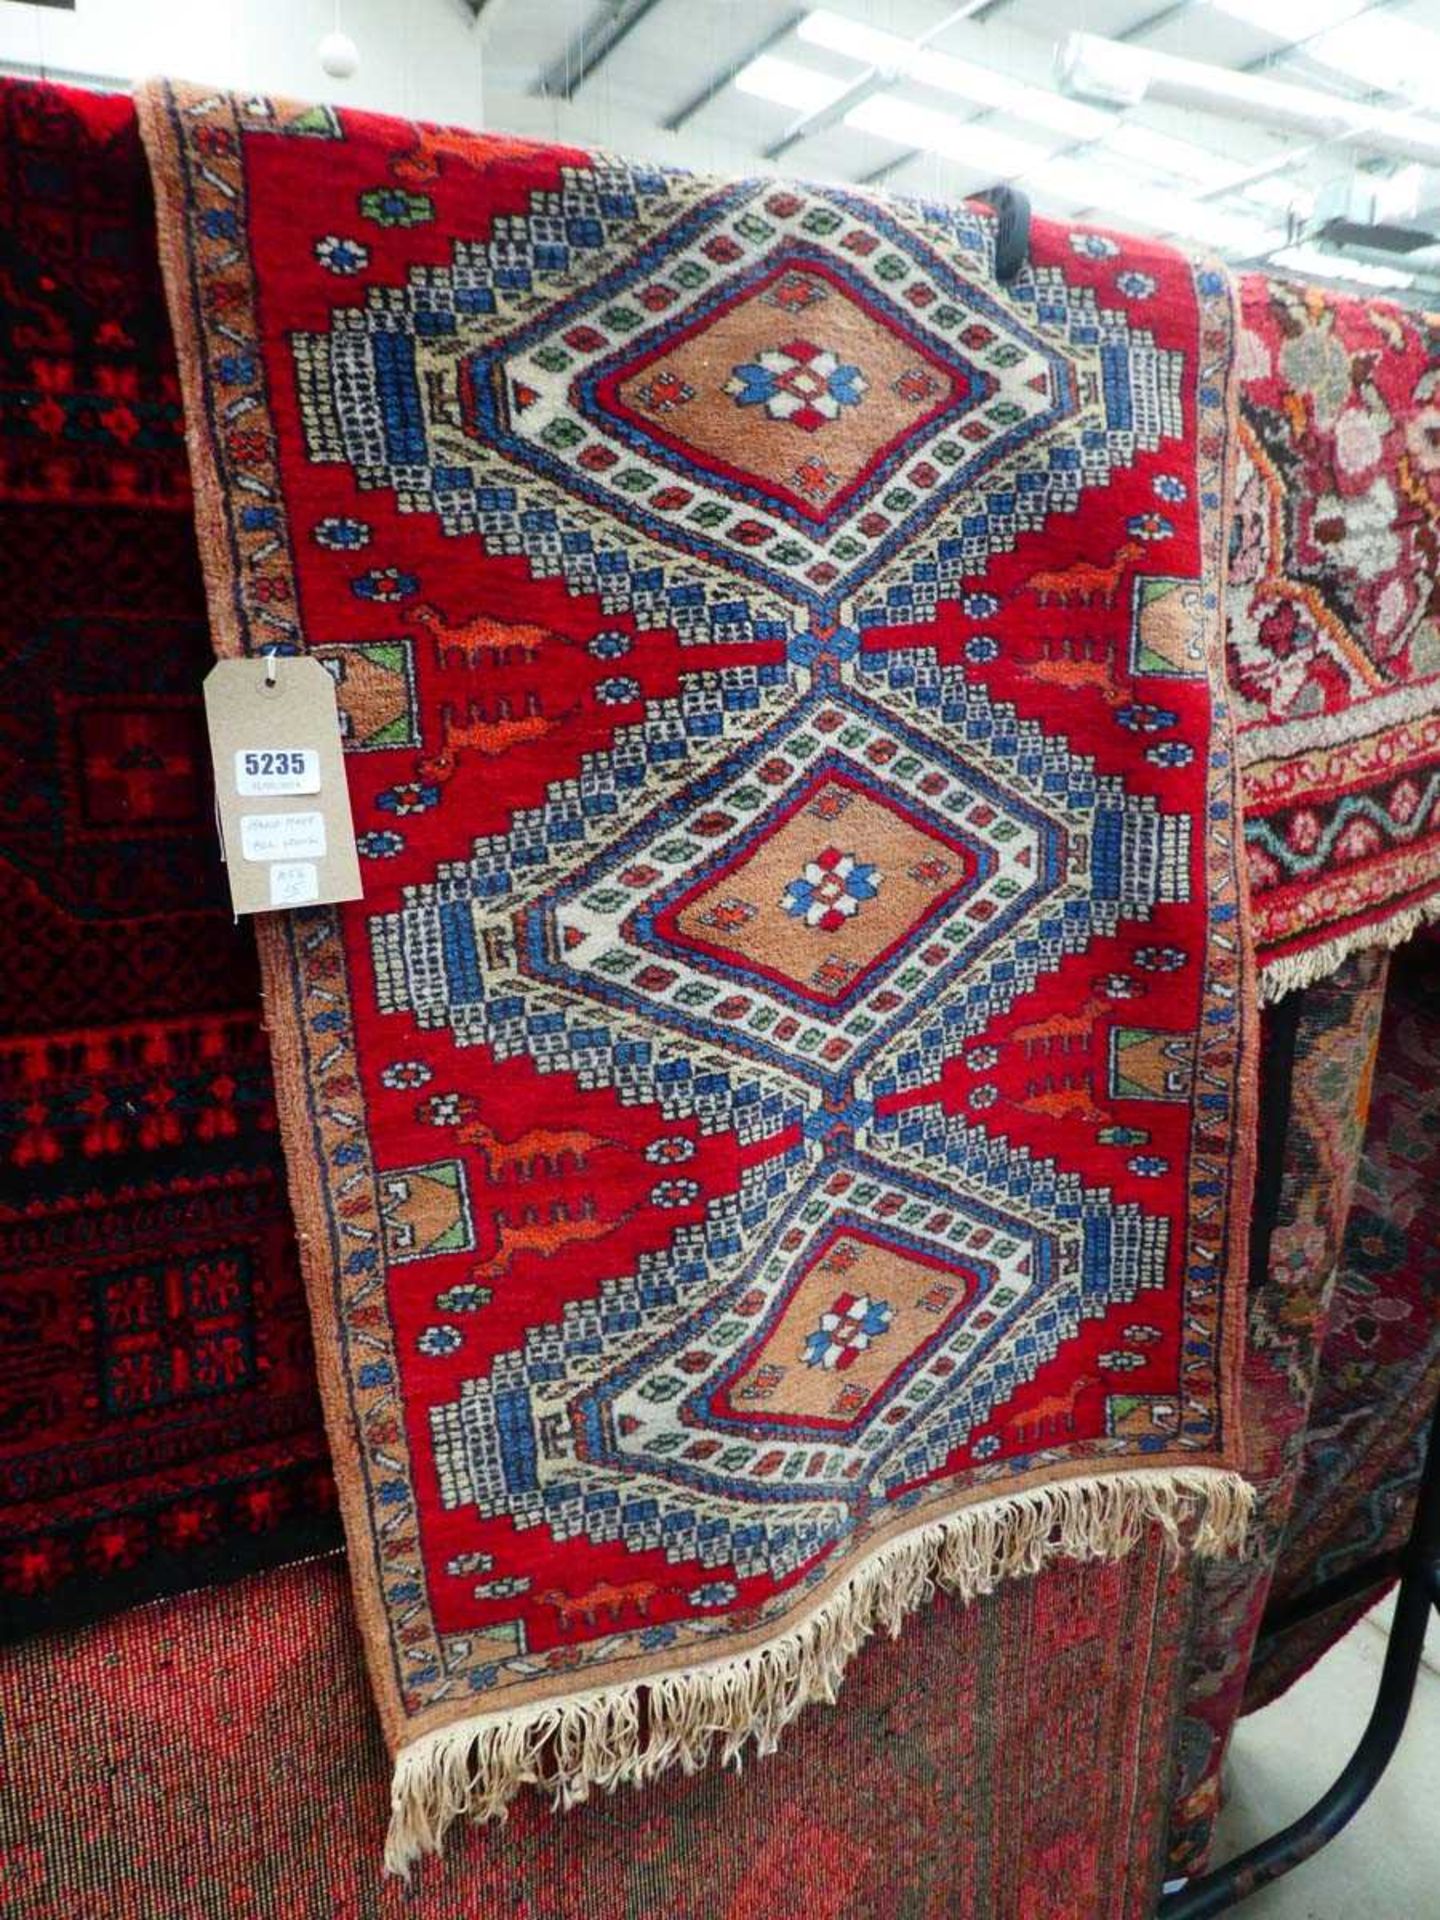 (15) Handmade woollen runner with red ground and repeated motifs